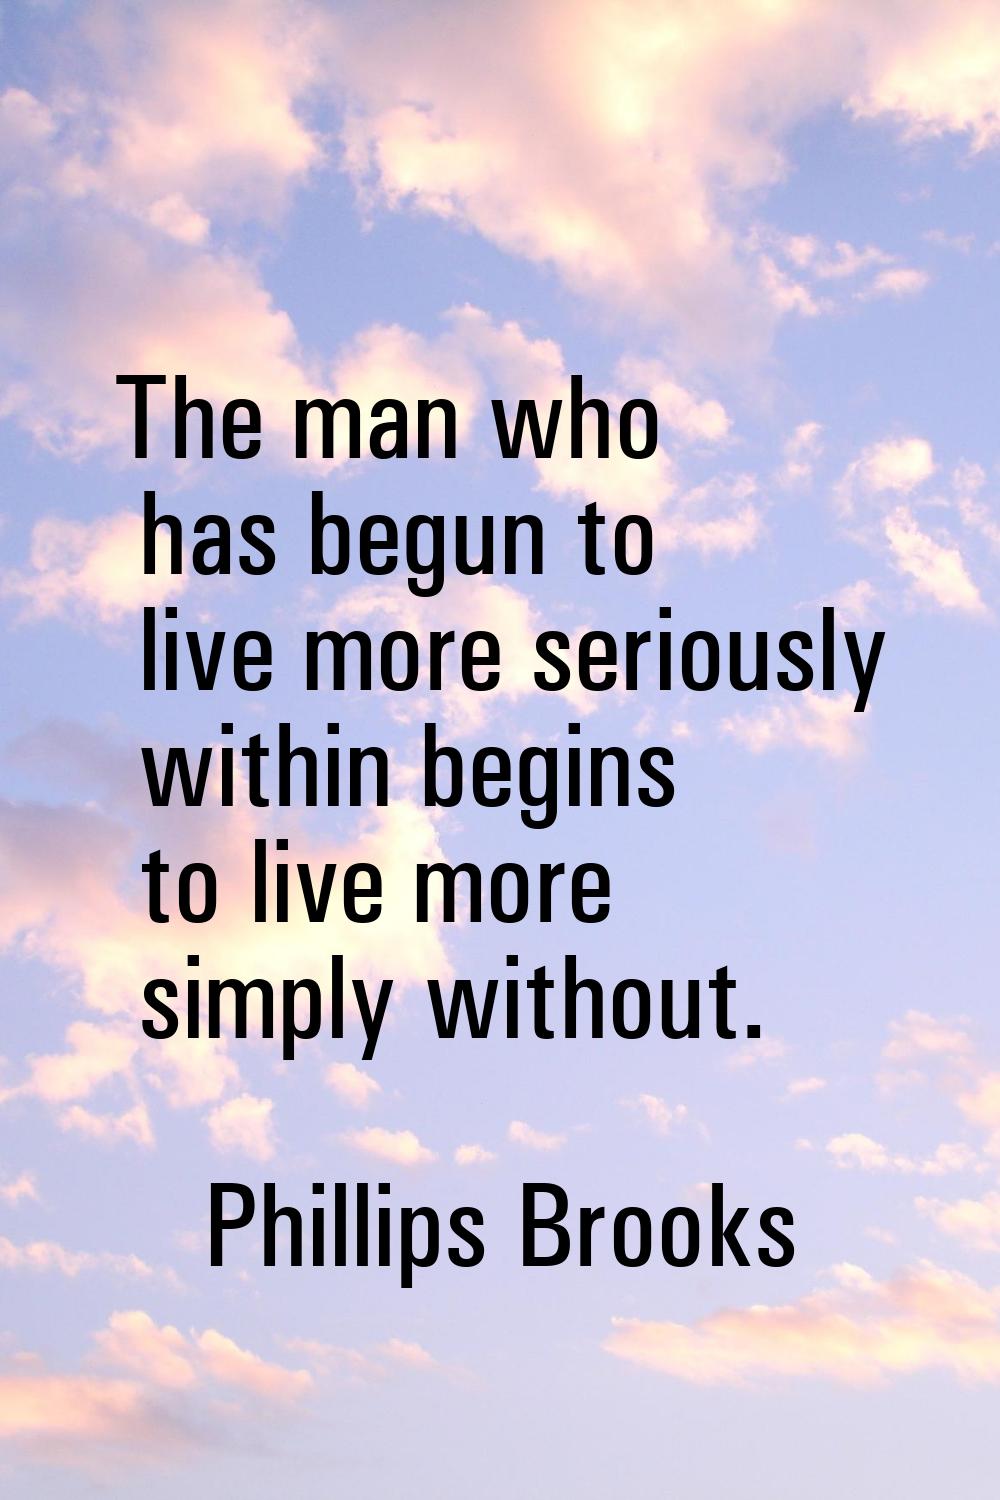 The man who has begun to live more seriously within begins to live more simply without.